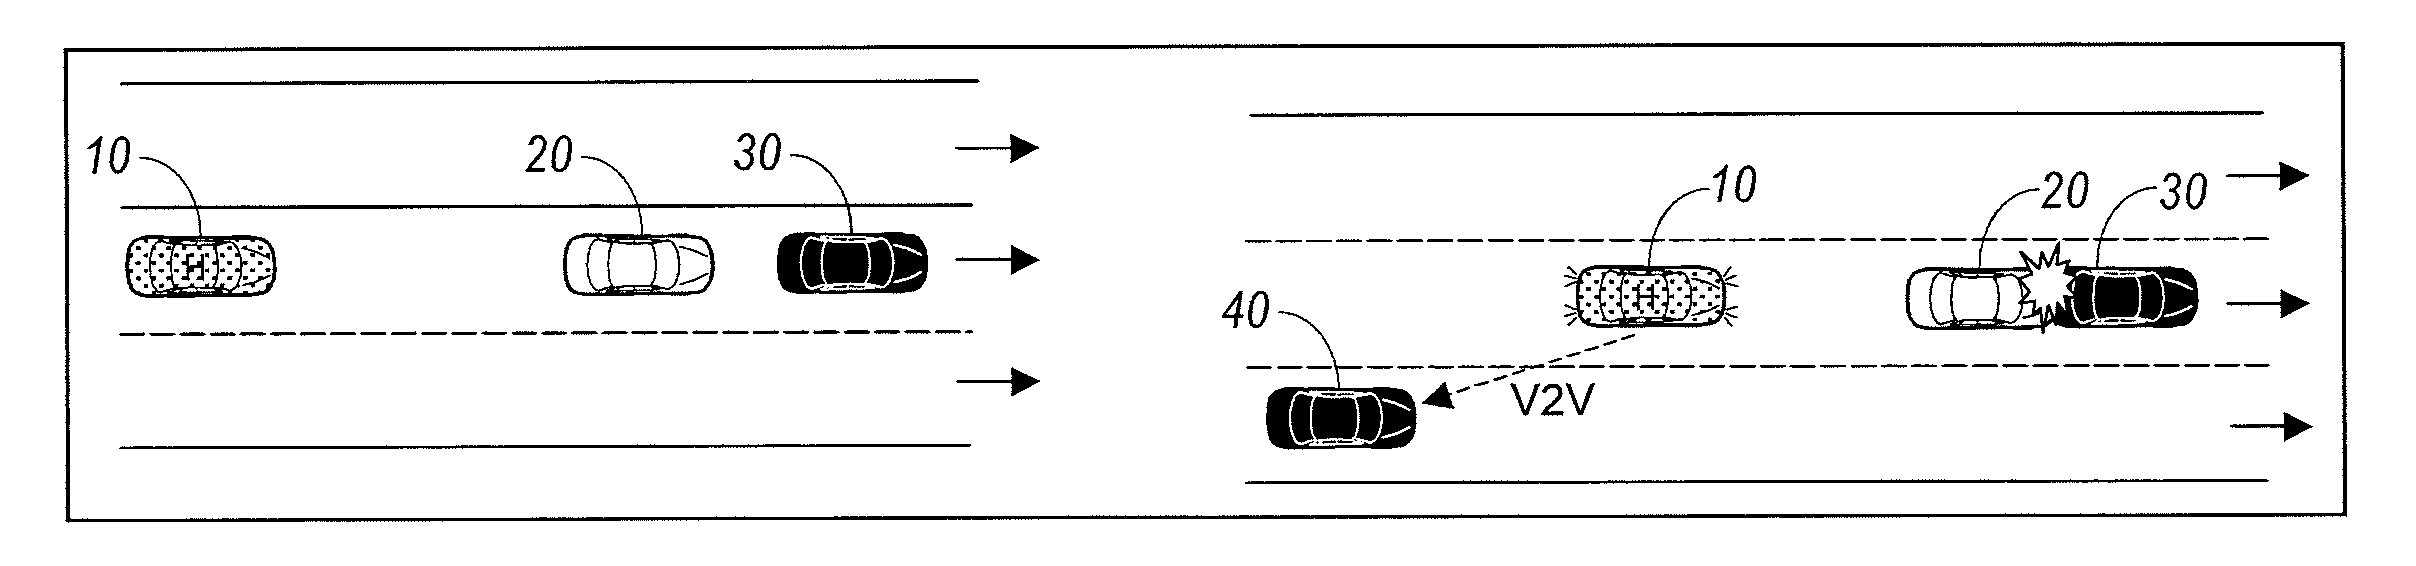 System and method for determining a collision status of a nearby vehicle